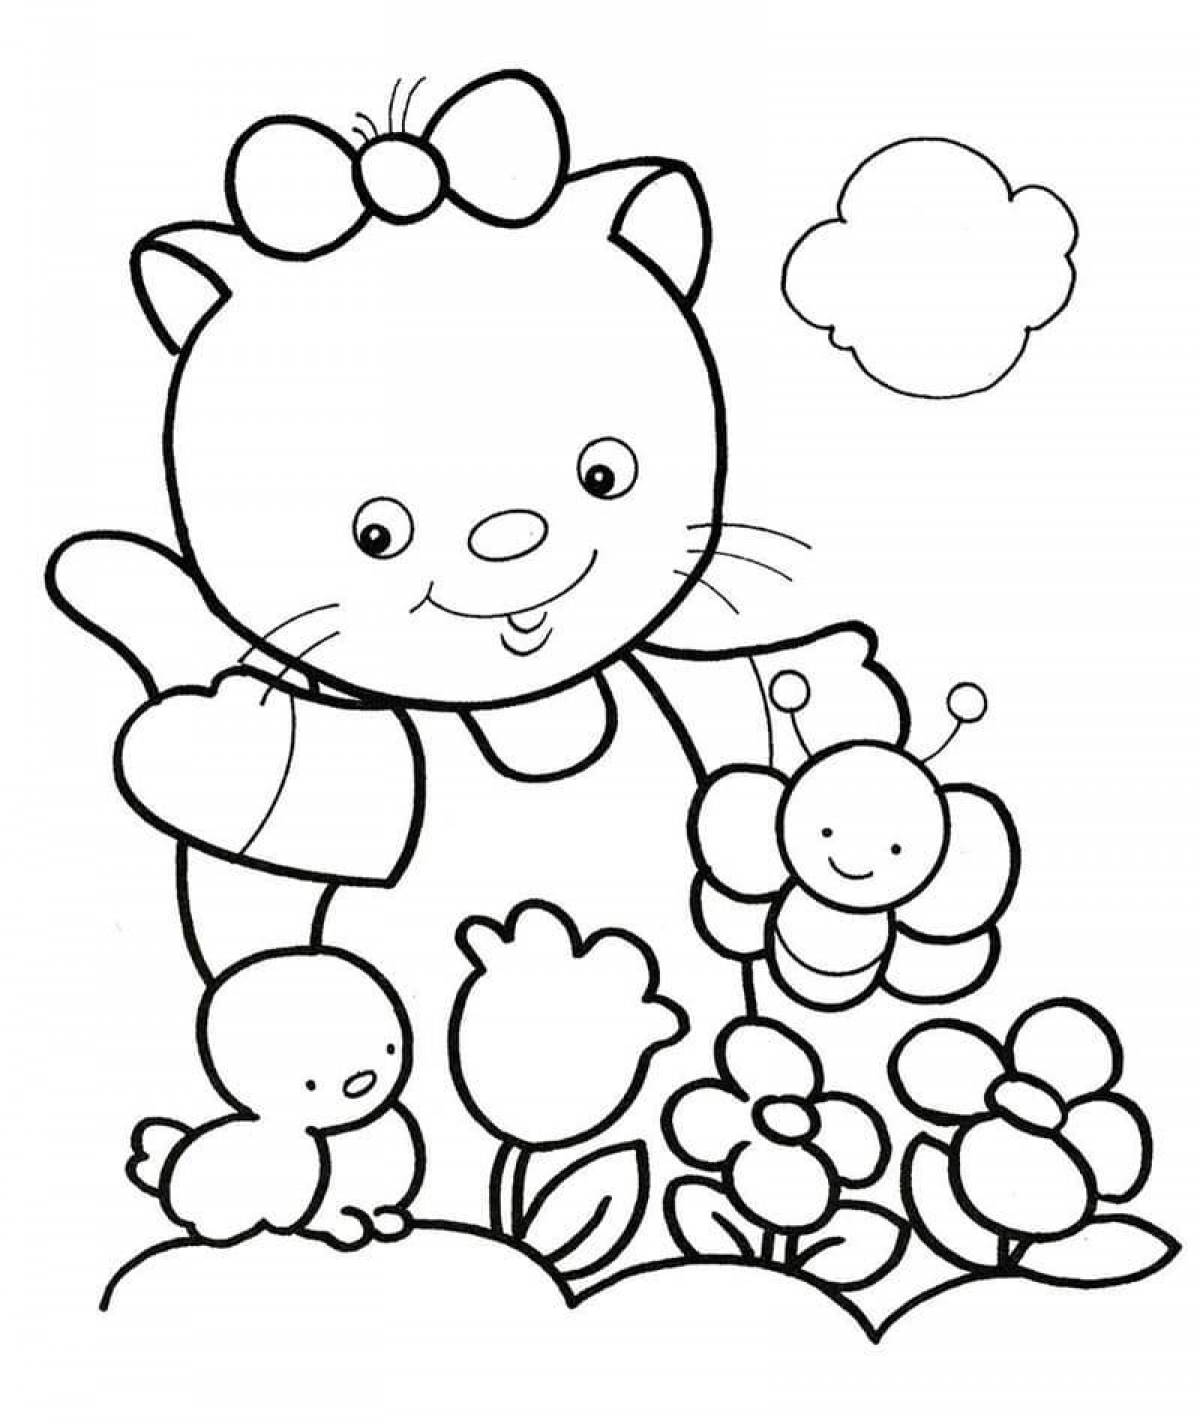 Adorable coloring book for girls 3 years old